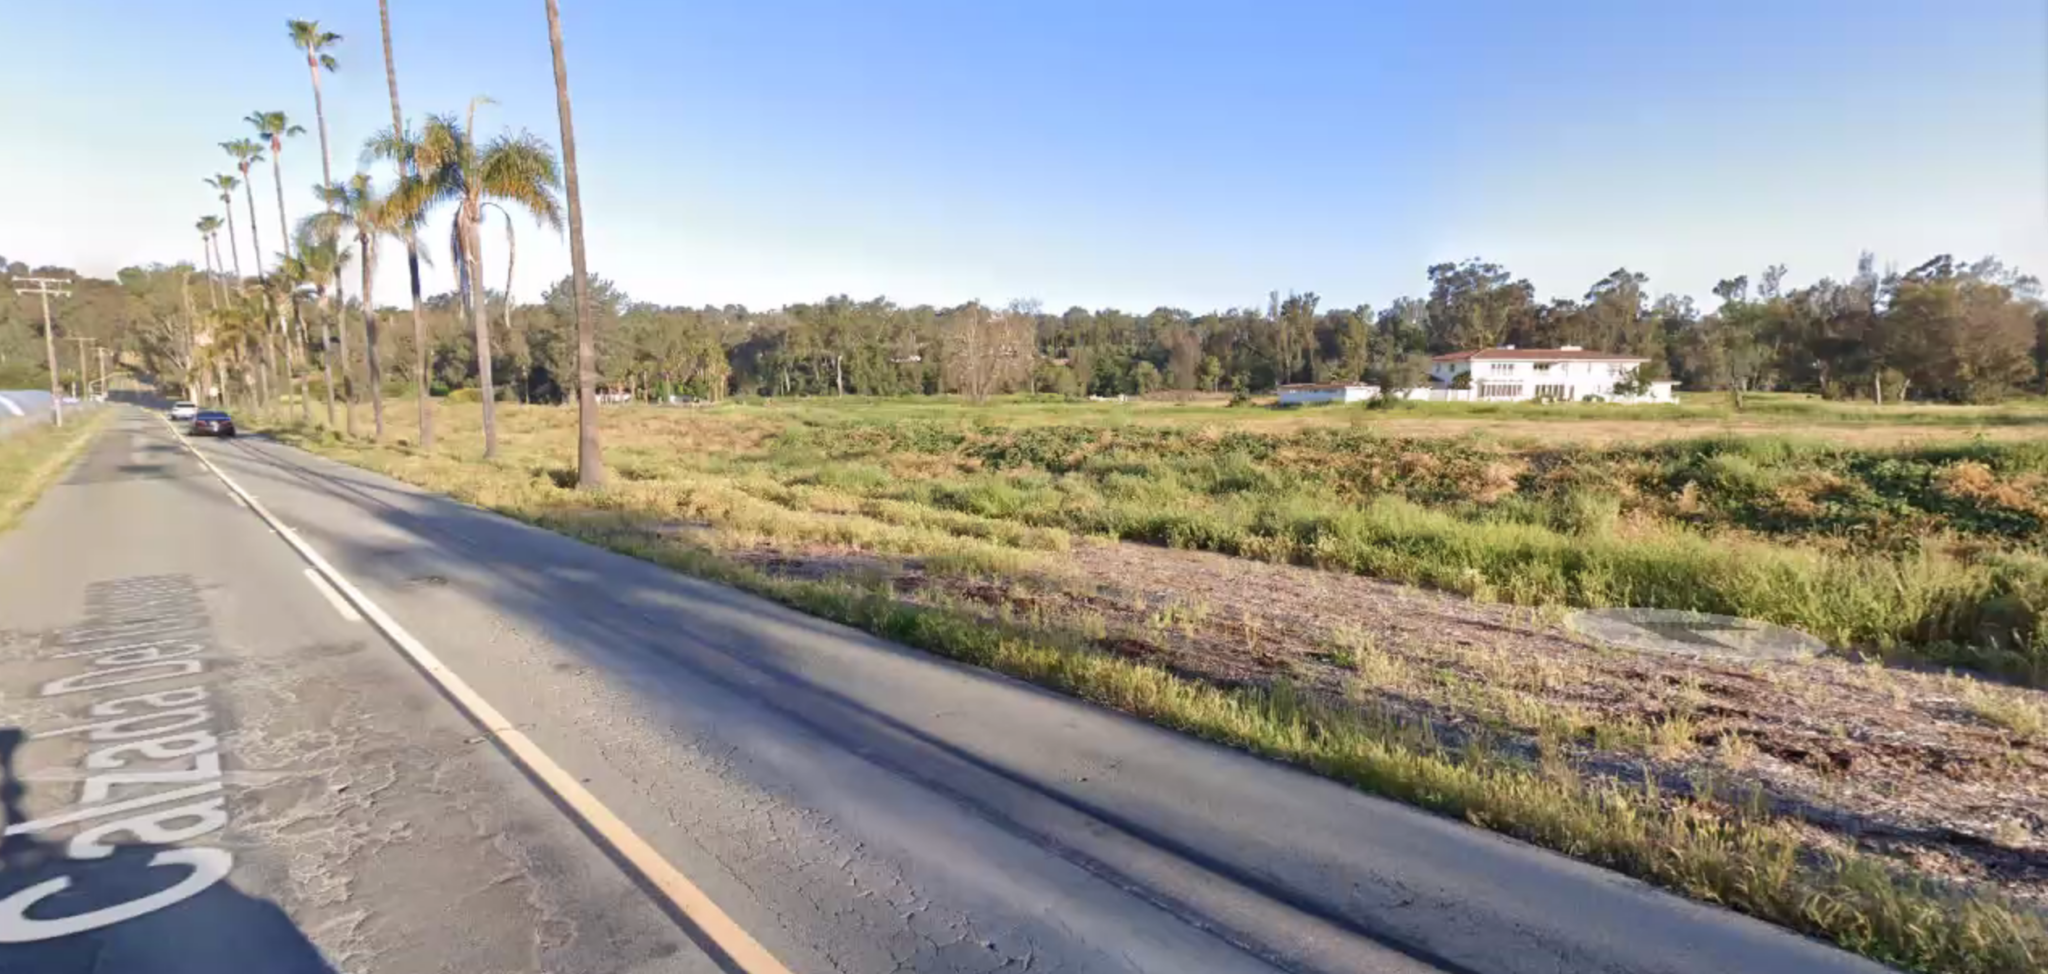 Street view of the plot of land that Silvergate Rancho Santa Fe would be developed on.